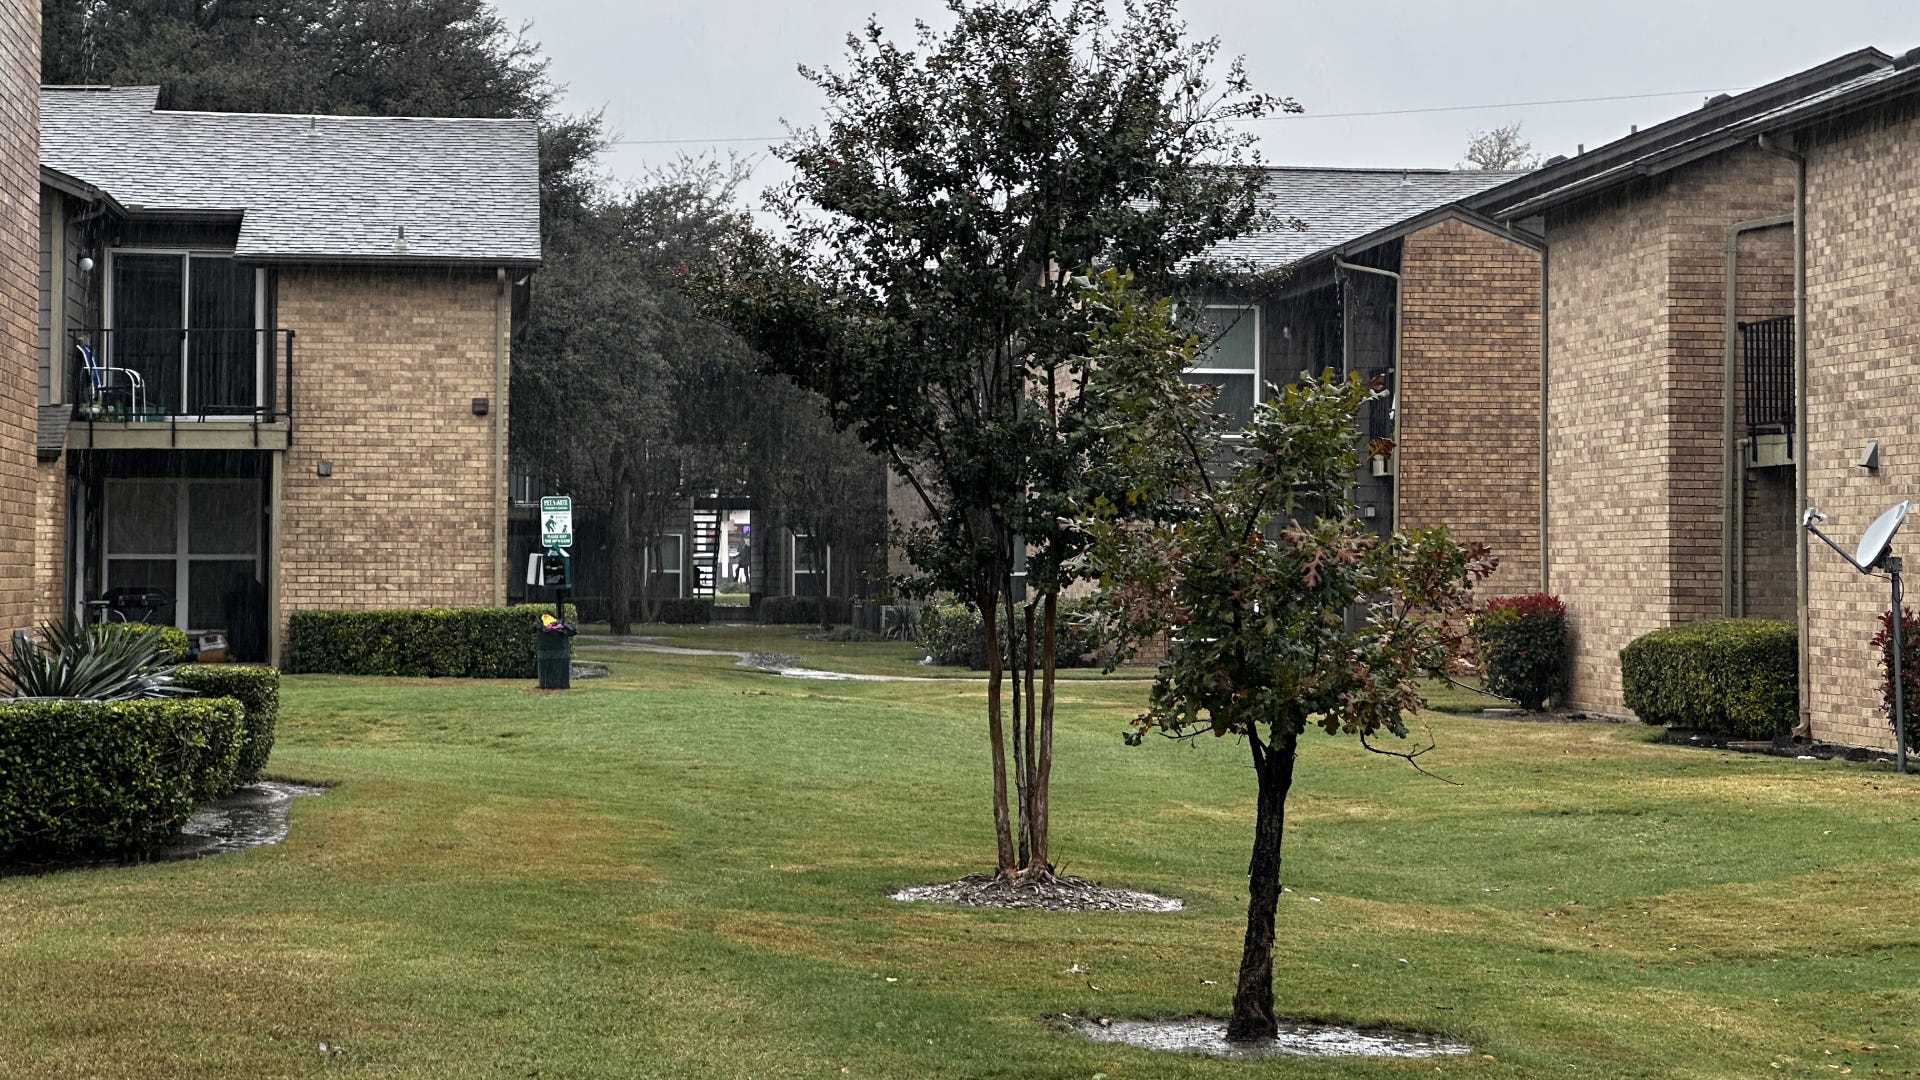 Apartments on either side of greenspace with two trees in the middle